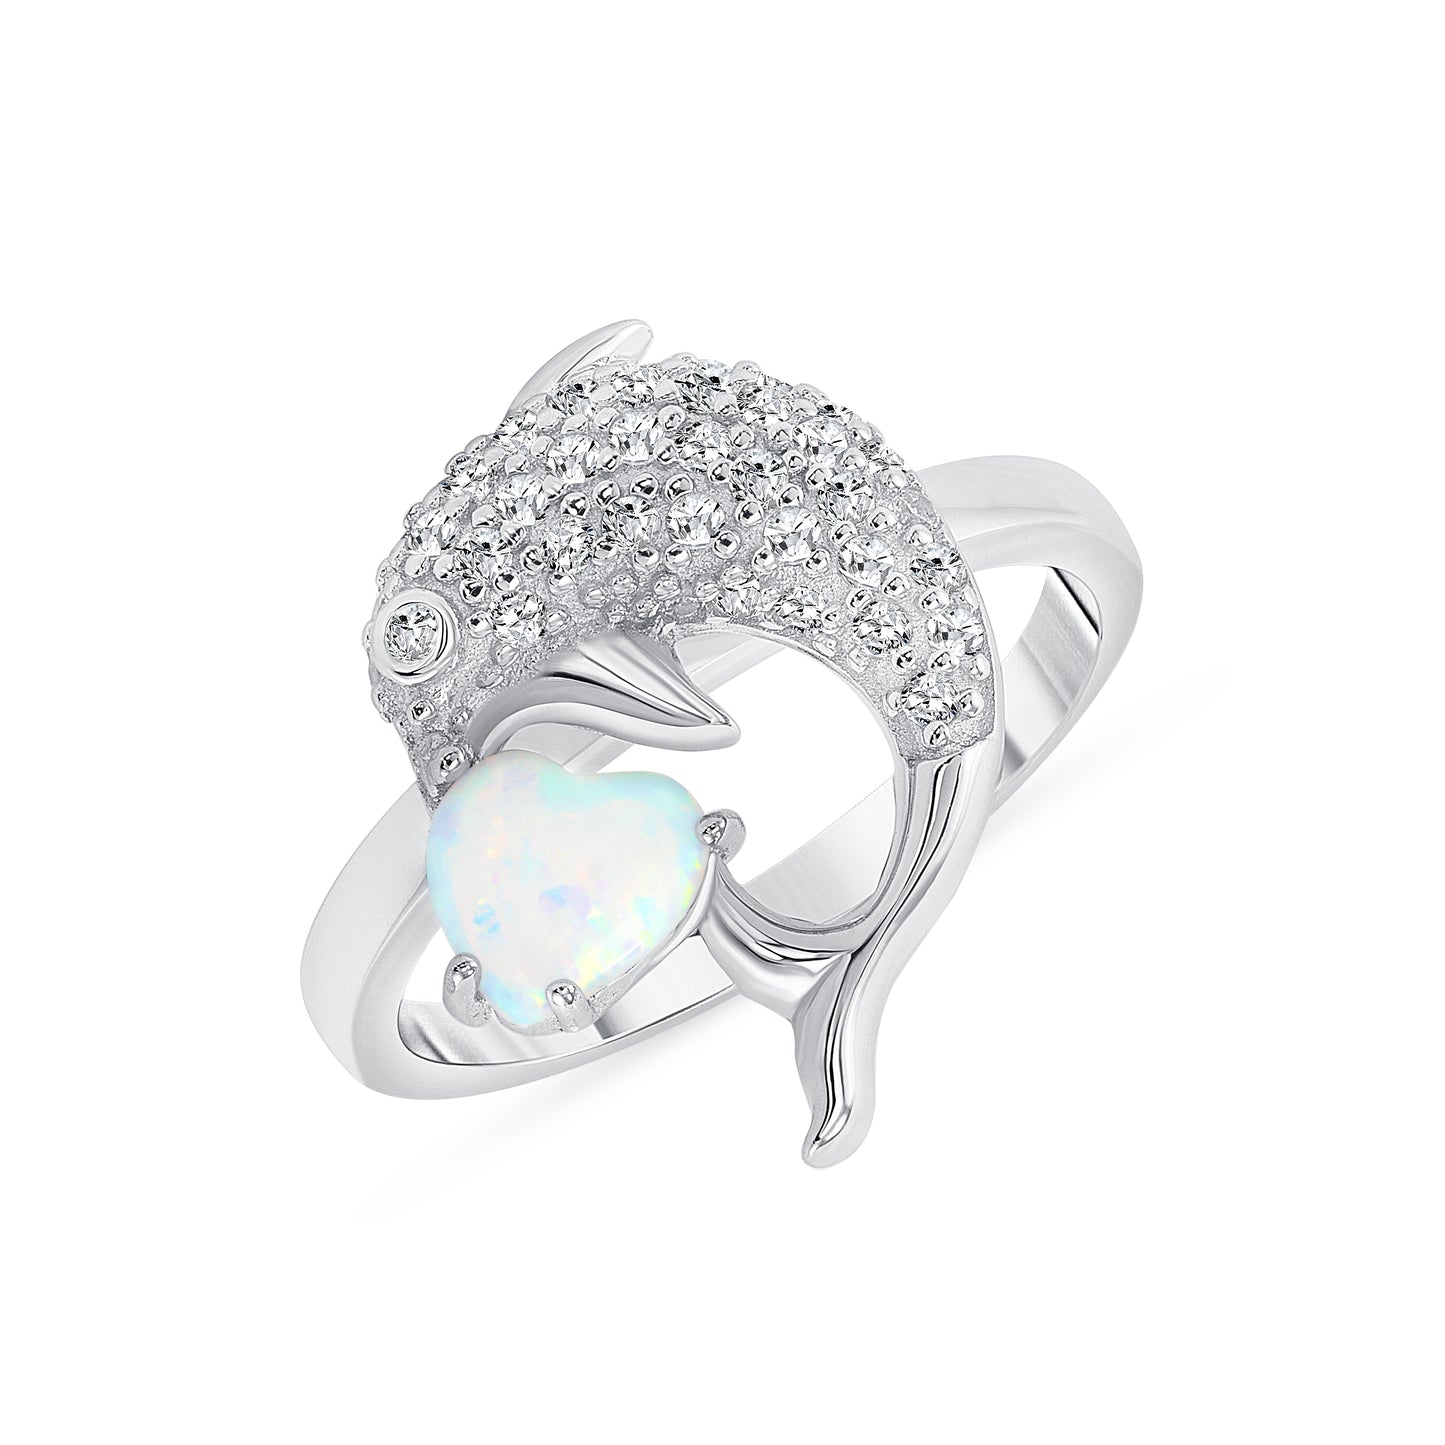 Silver 925 Rhodium Plated Cubic Zirconia and Opal Dolphin Ring. BR14242